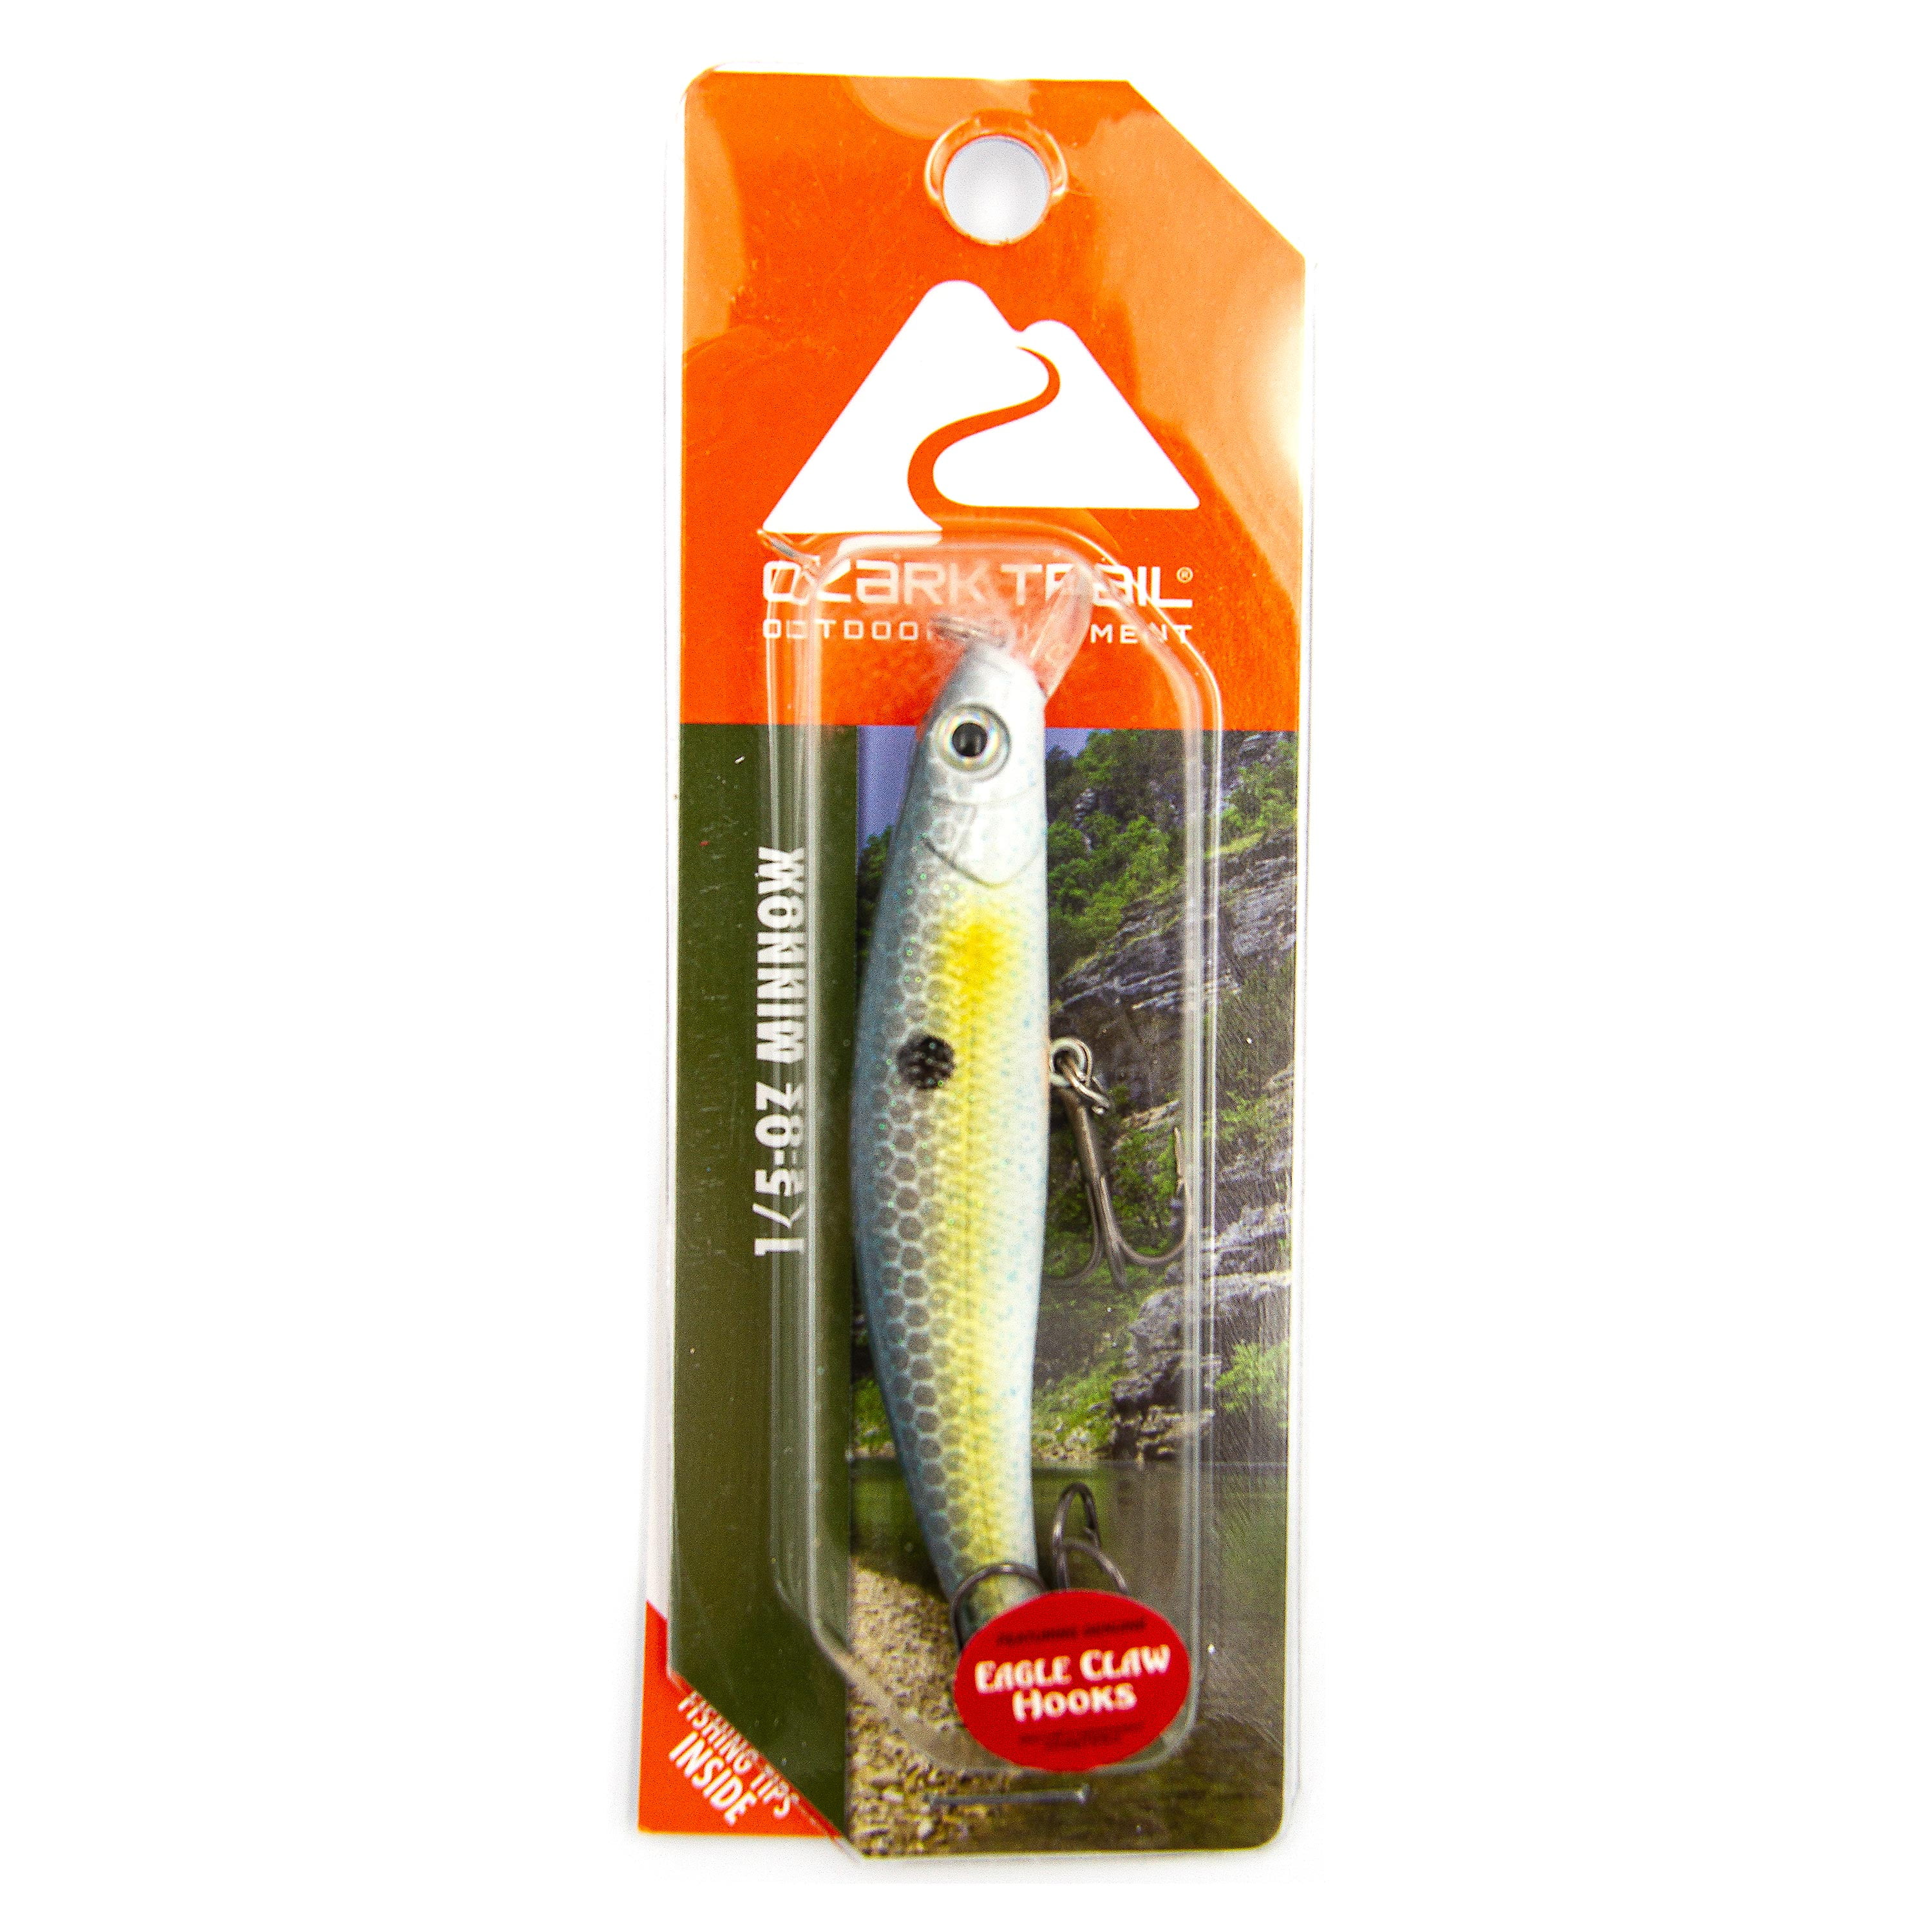 Fishing Lures for sale in Lake Lucerne